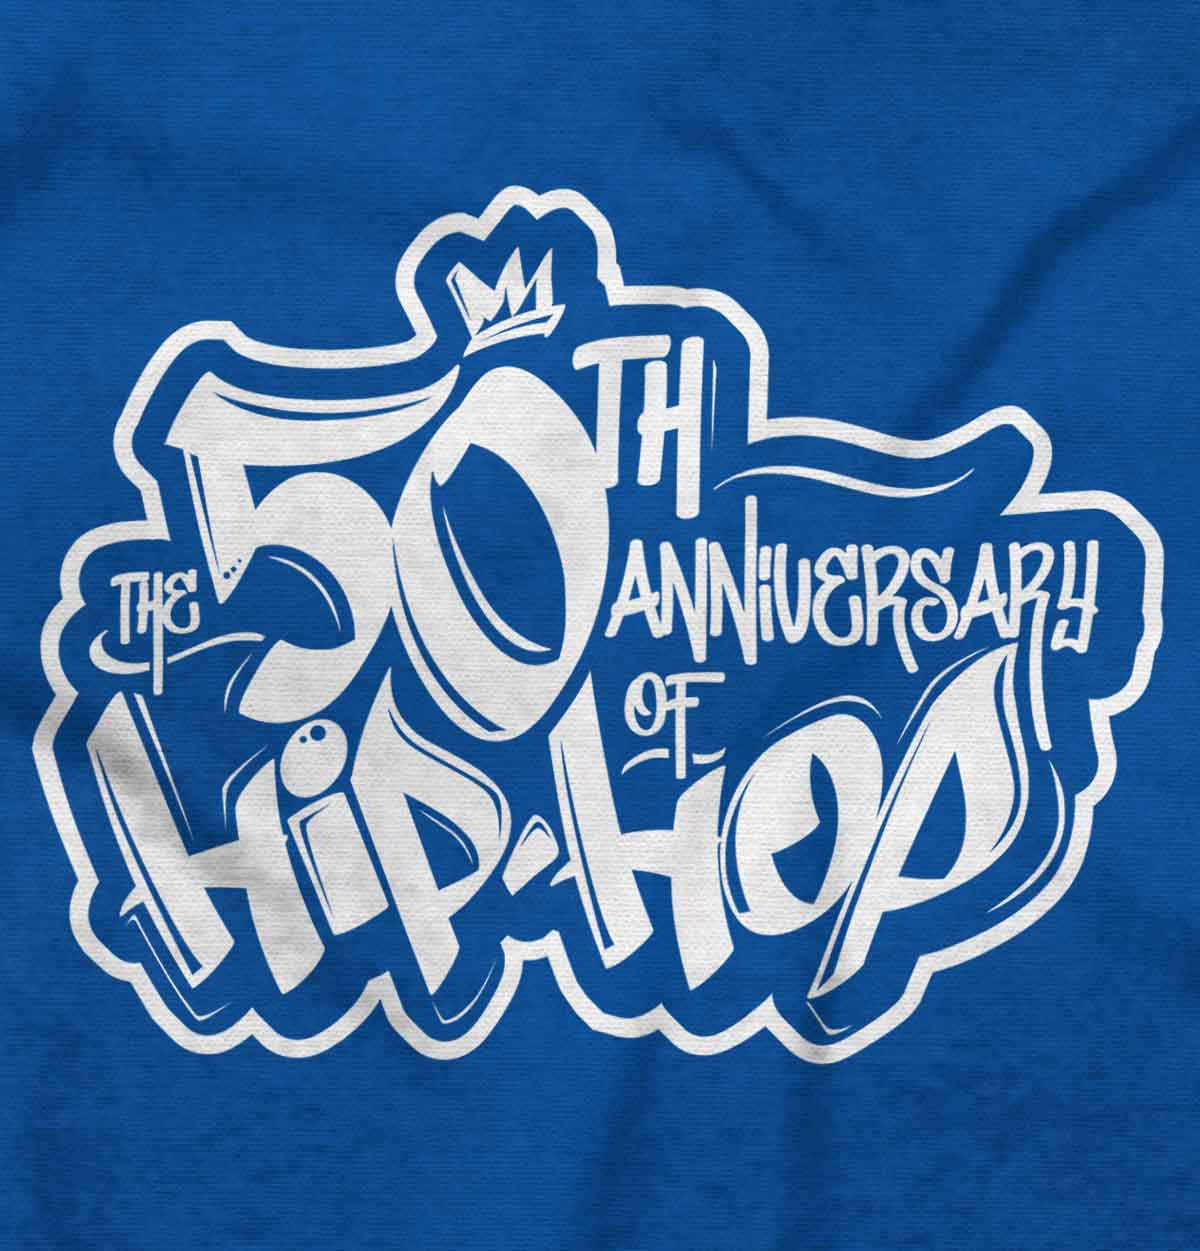 This shirt features a design inspired by urban art with a DJ mixing music and speakers playing. It's a celebration of 50 years of hip-hop and pays homage to its roots.